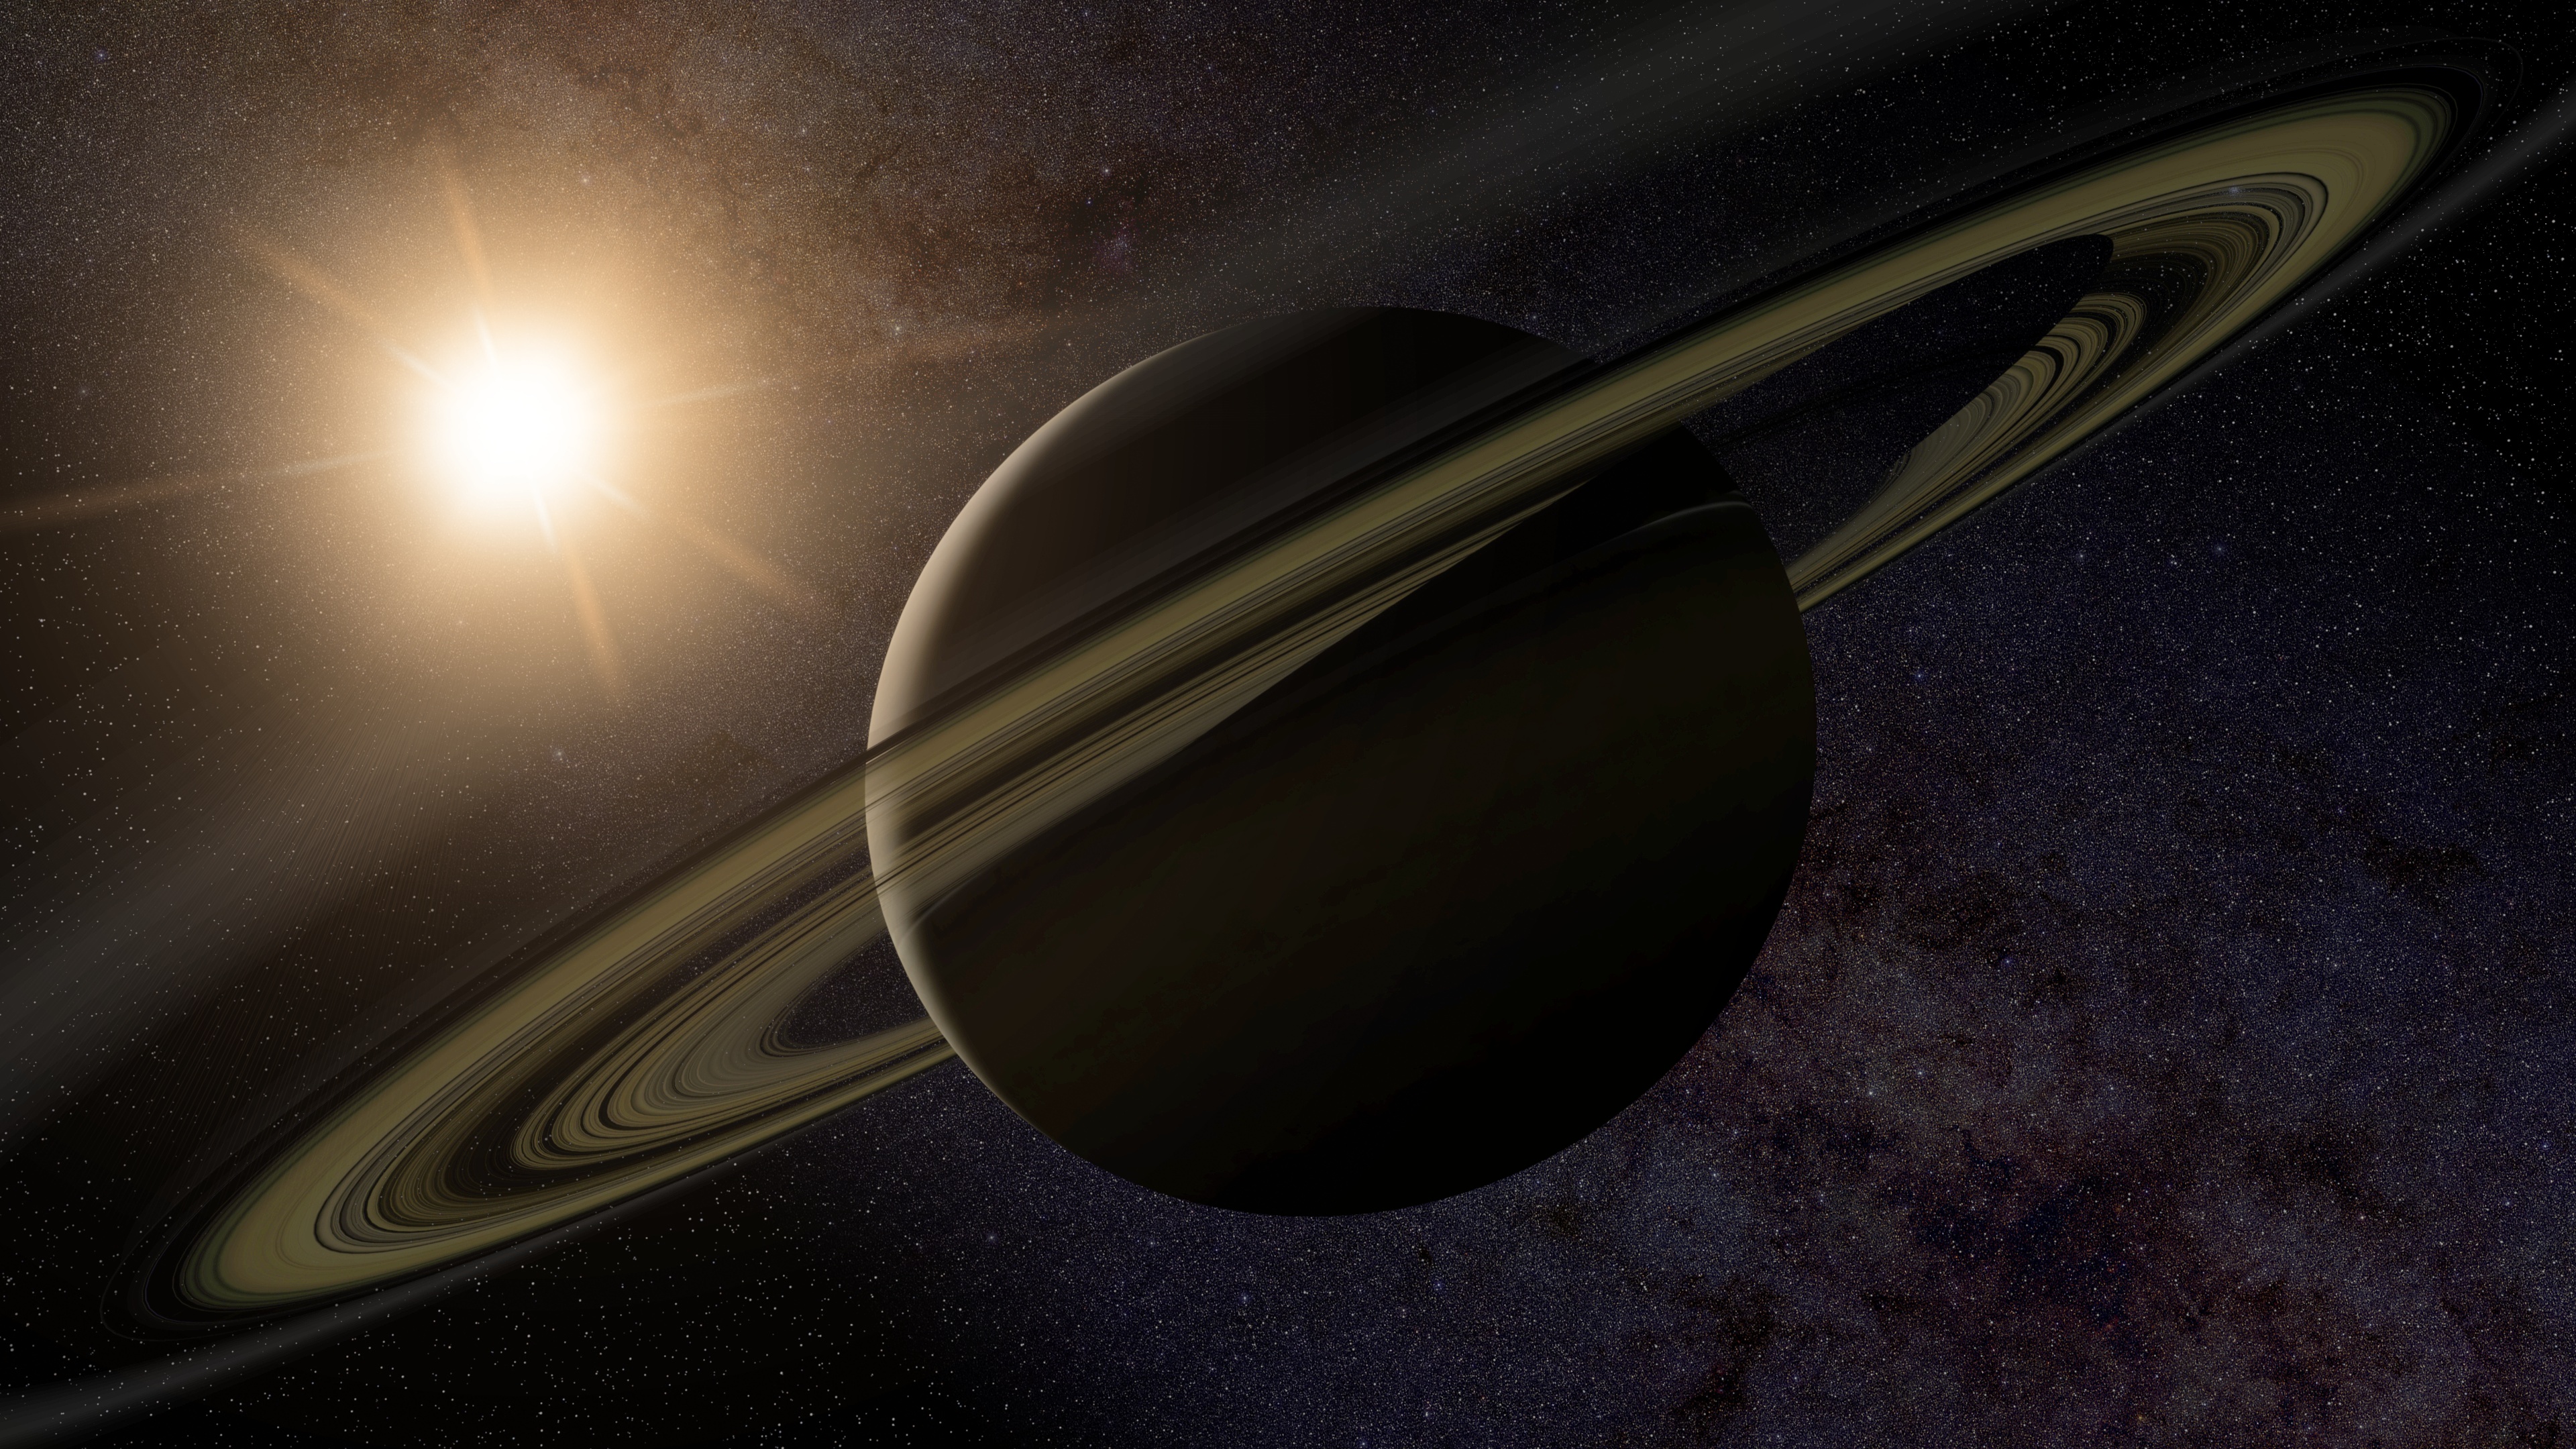 sun, planet, planetary ring, space Square Wallpapers